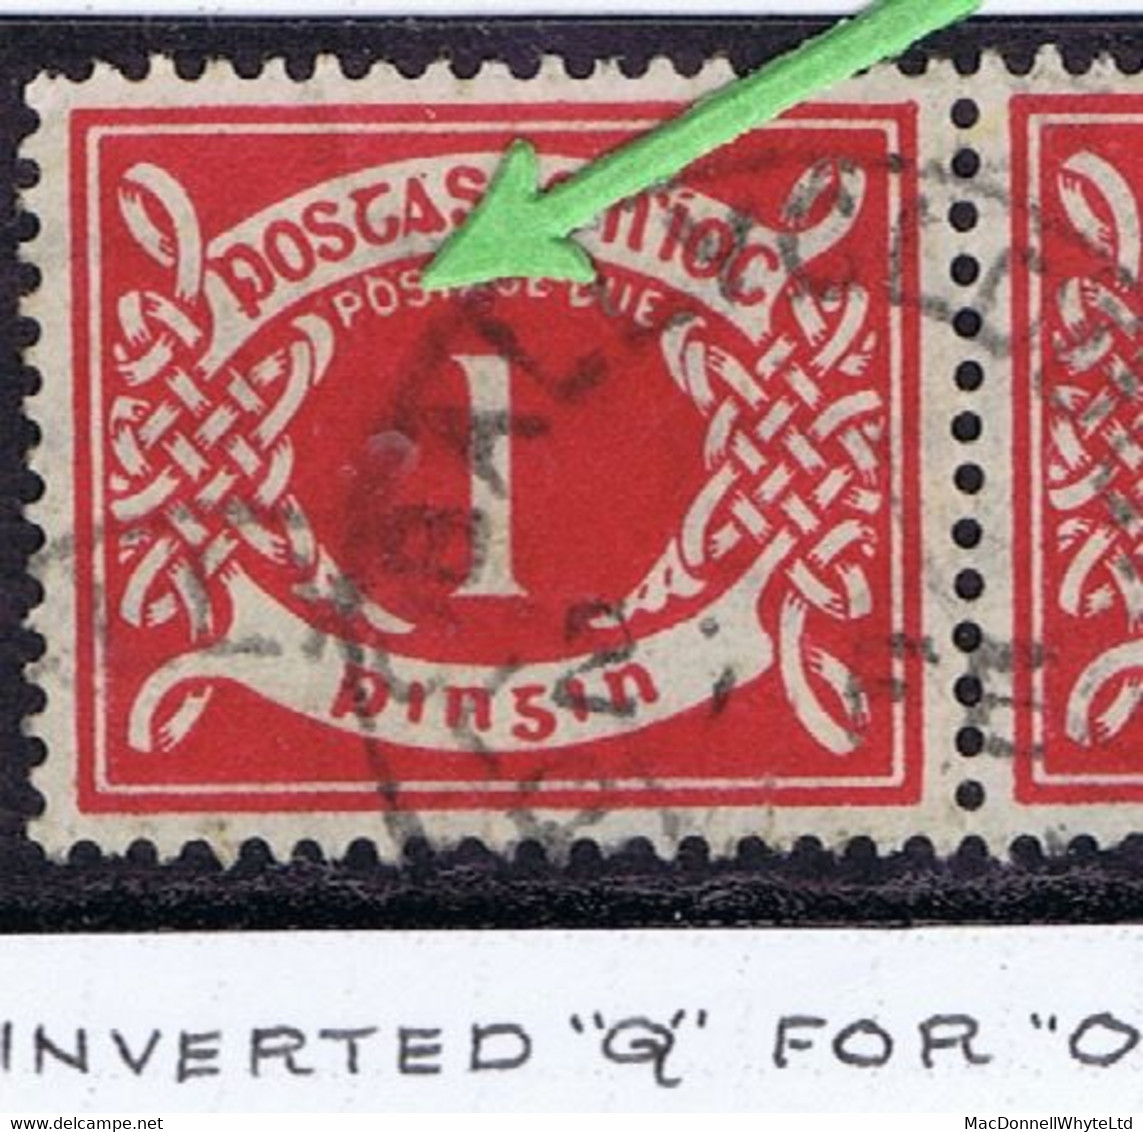 Ireland Postage Dues Varieties Inc 1940-69 E 1d Inverted Q, 2d Aspirate Missing, 5d+8d Watermark Inverted - Postage Due